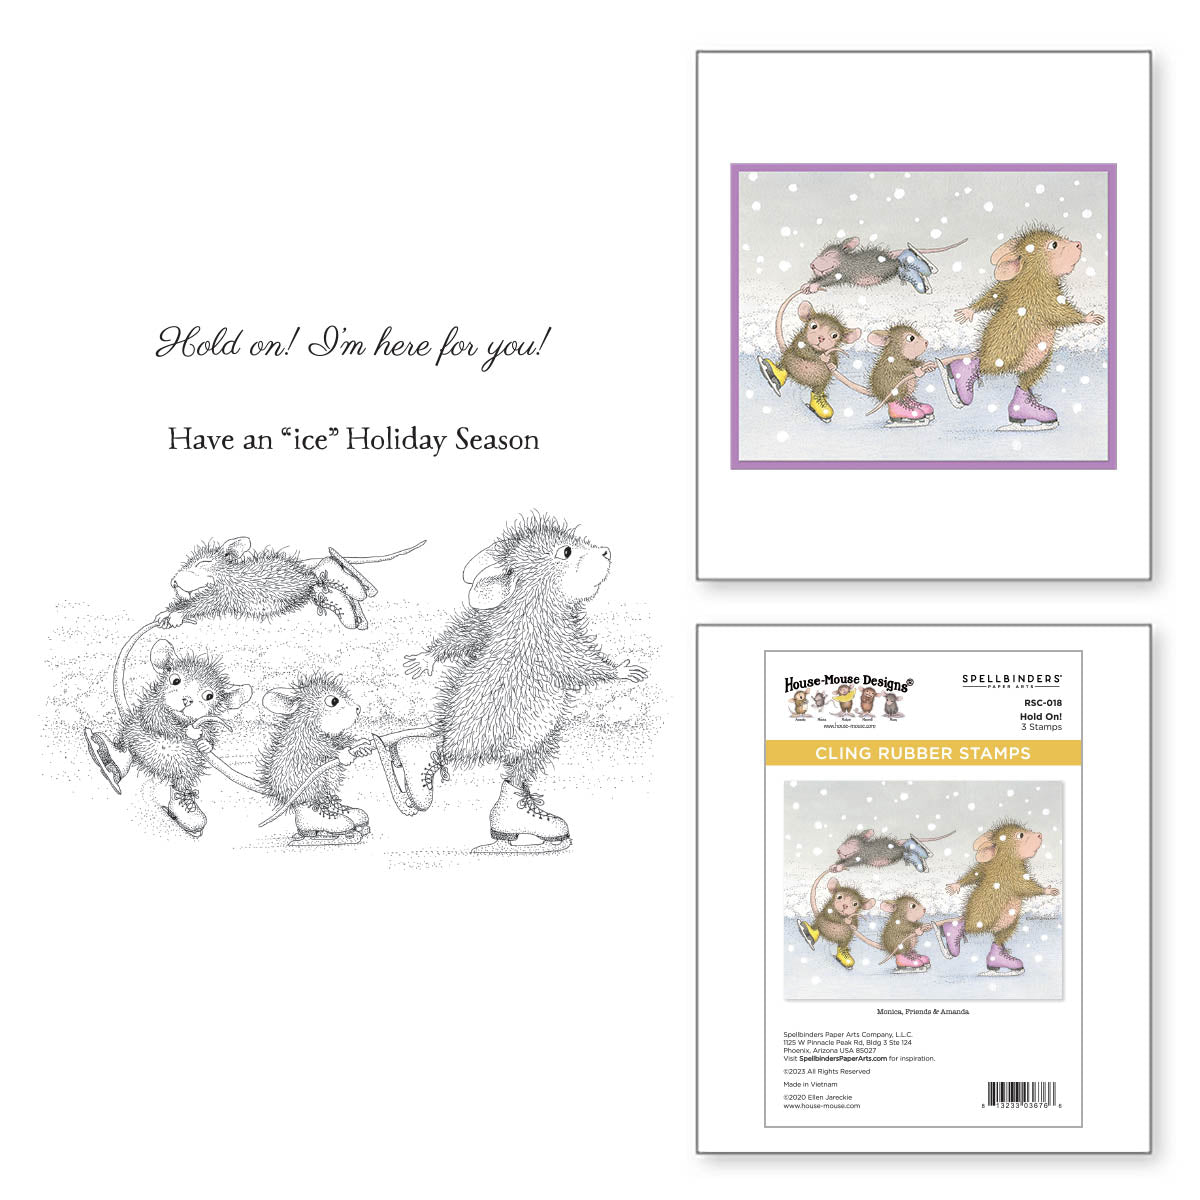 Hold On! Cling Rubber Stamp Set from the House-Mouse Holiday Collection